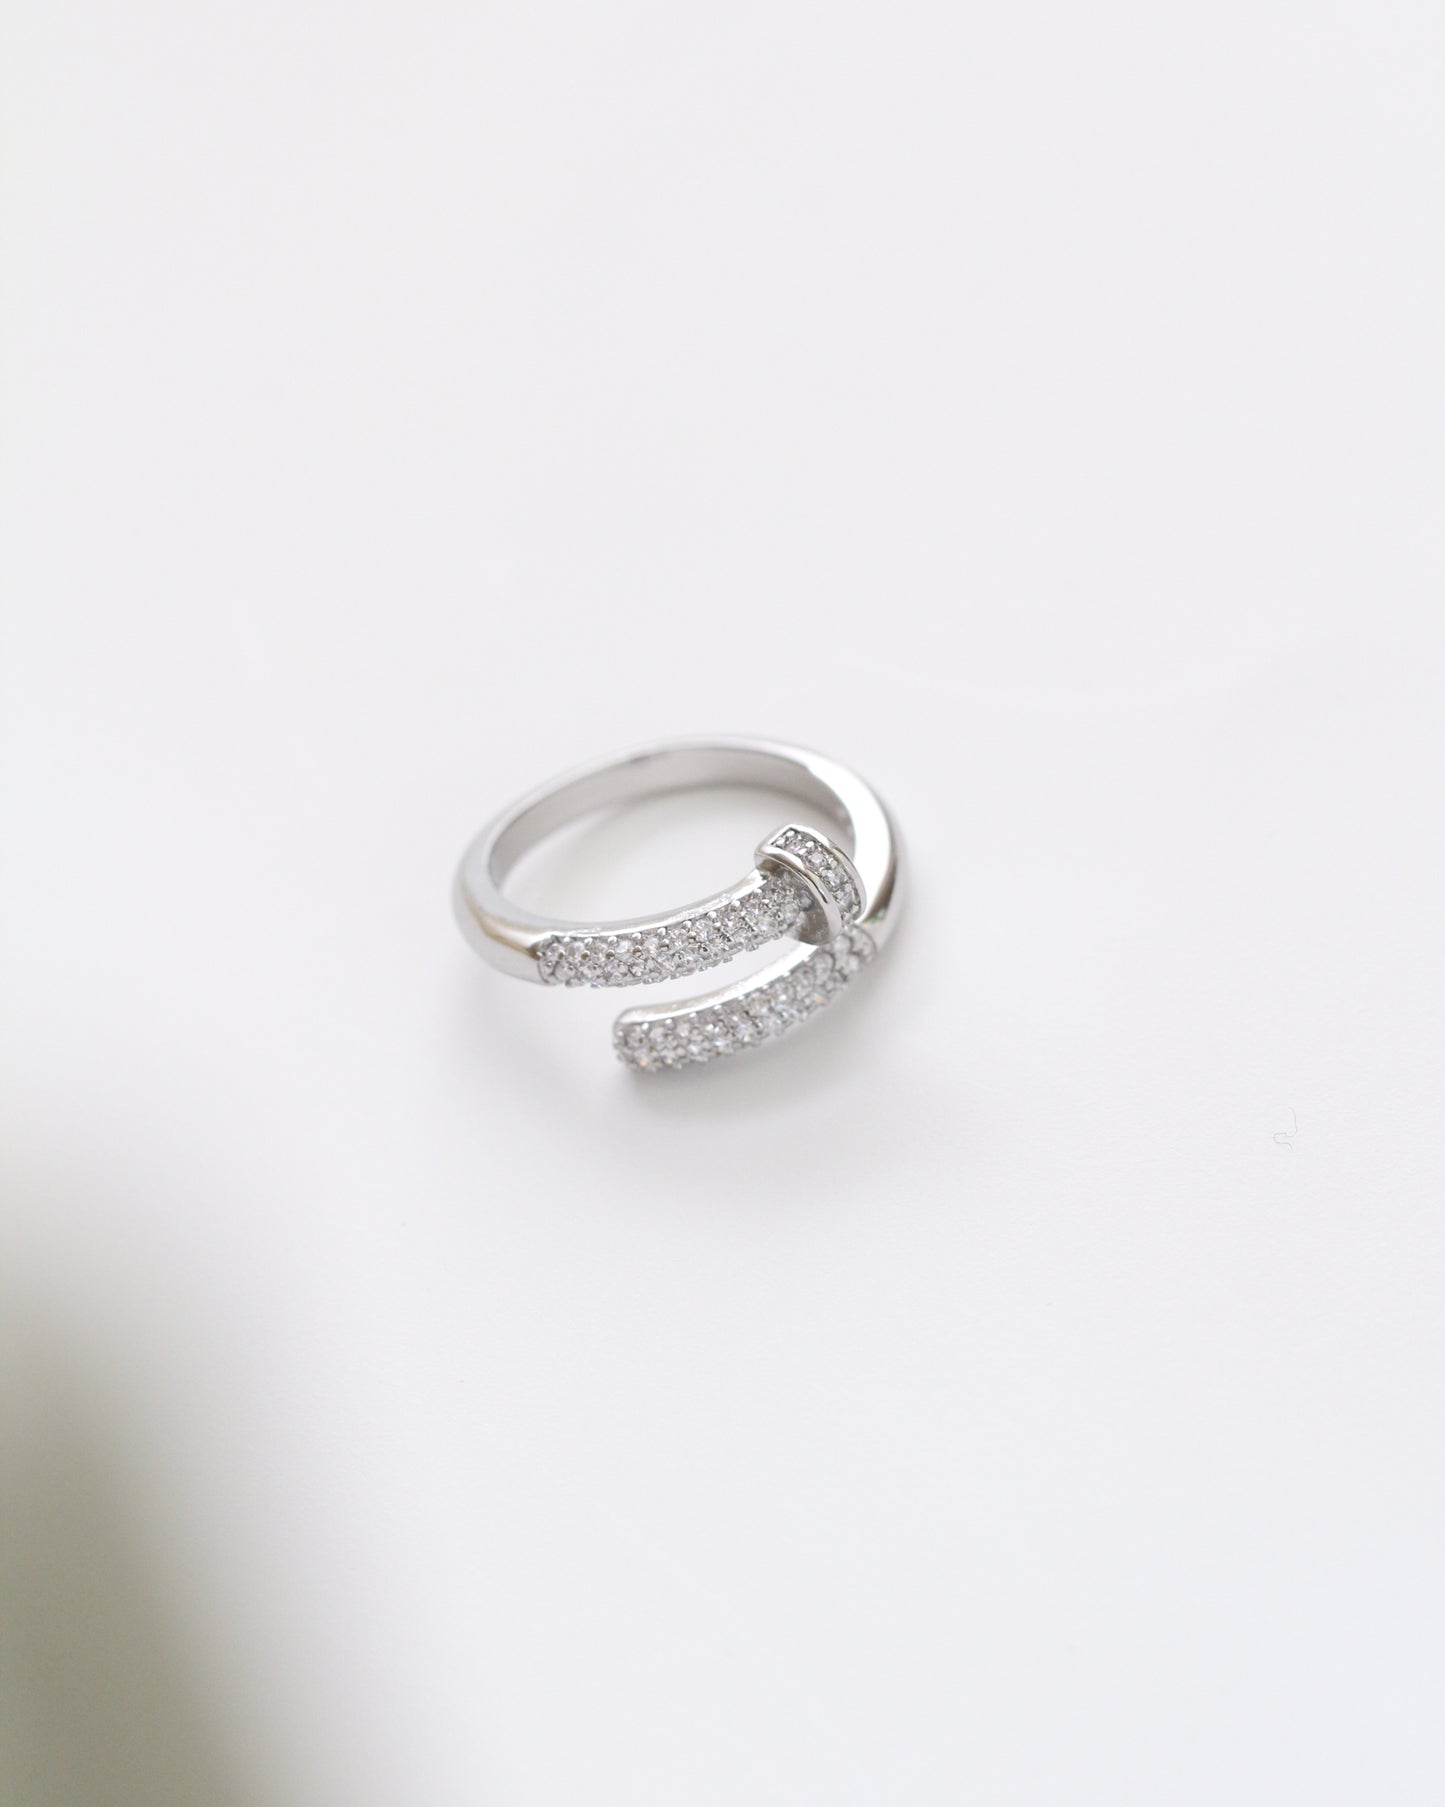 The Adjustable Pave Nail Ring. Order at KADOU Boutique.